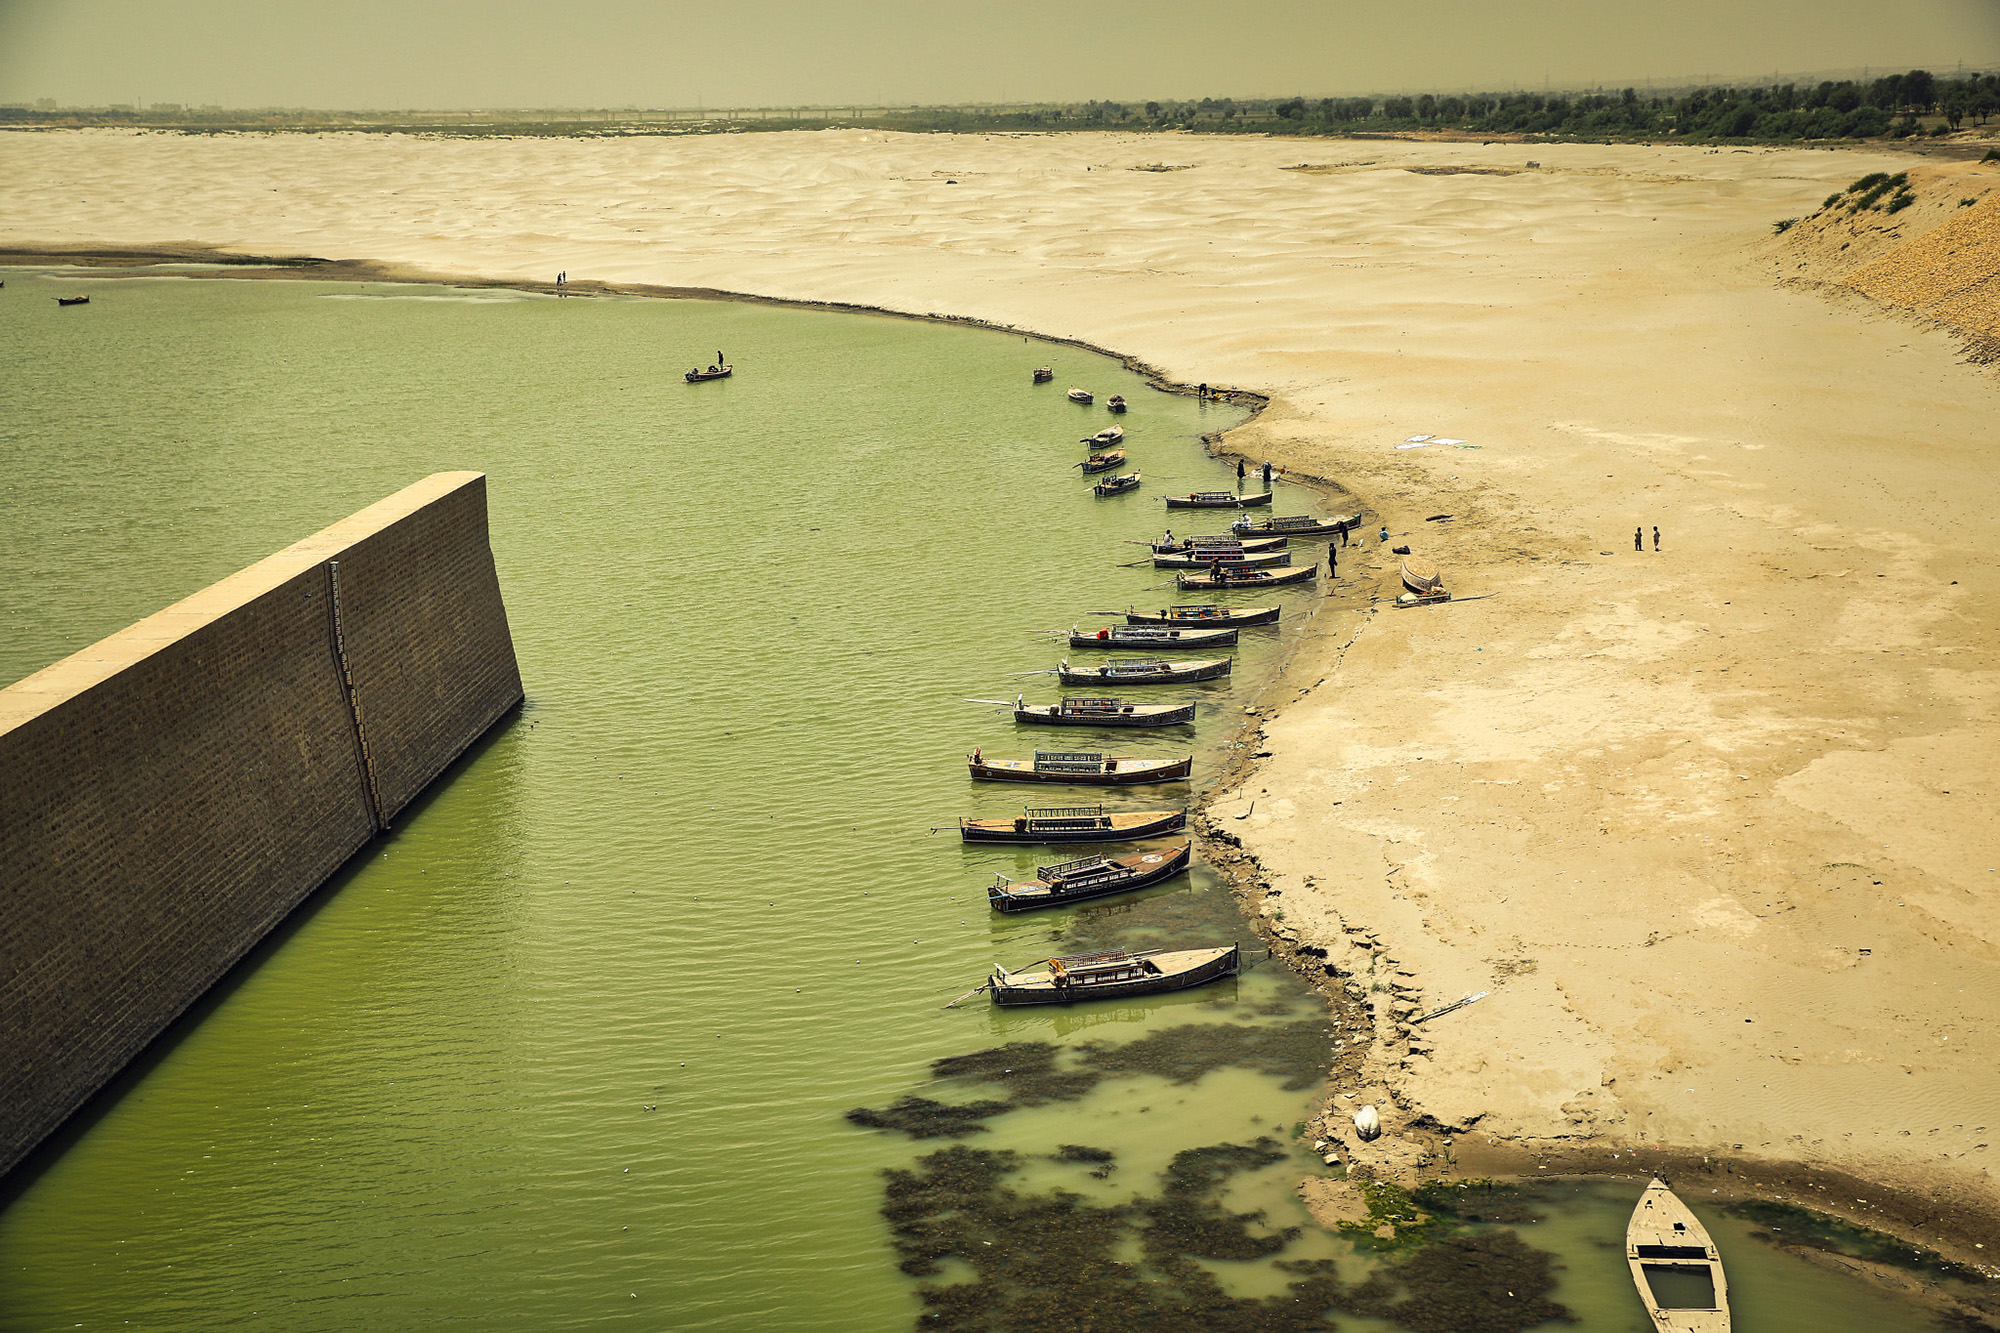 Boats tied to the bank of the Indus River in Pakistan.